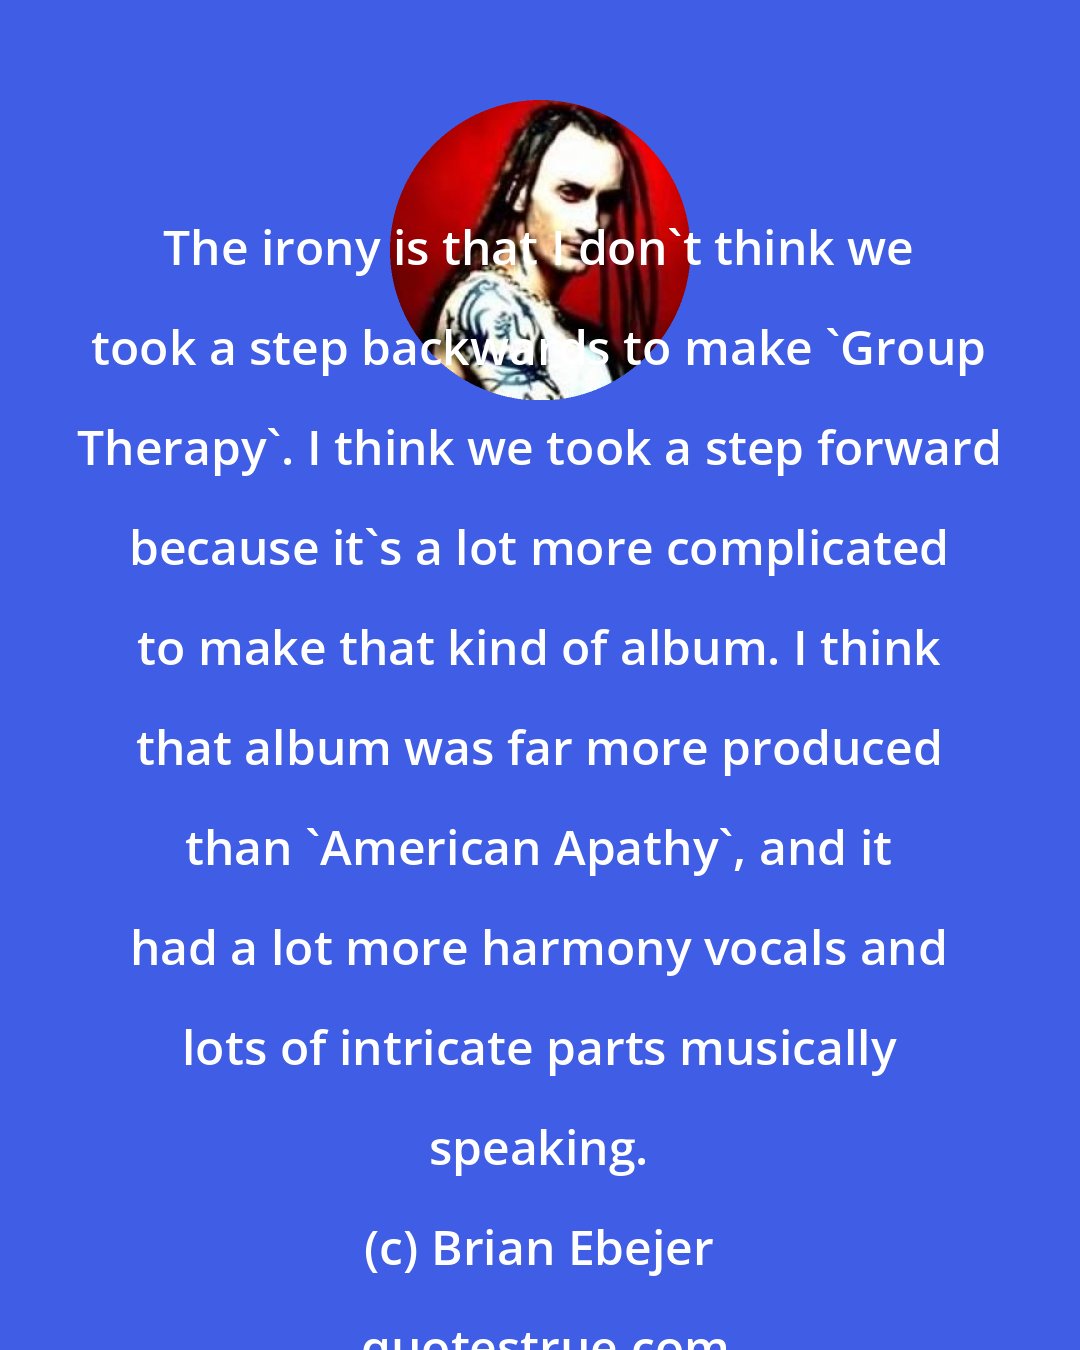 Brian Ebejer: The irony is that I don't think we took a step backwards to make 'Group Therapy'. I think we took a step forward because it's a lot more complicated to make that kind of album. I think that album was far more produced than 'American Apathy', and it had a lot more harmony vocals and lots of intricate parts musically speaking.